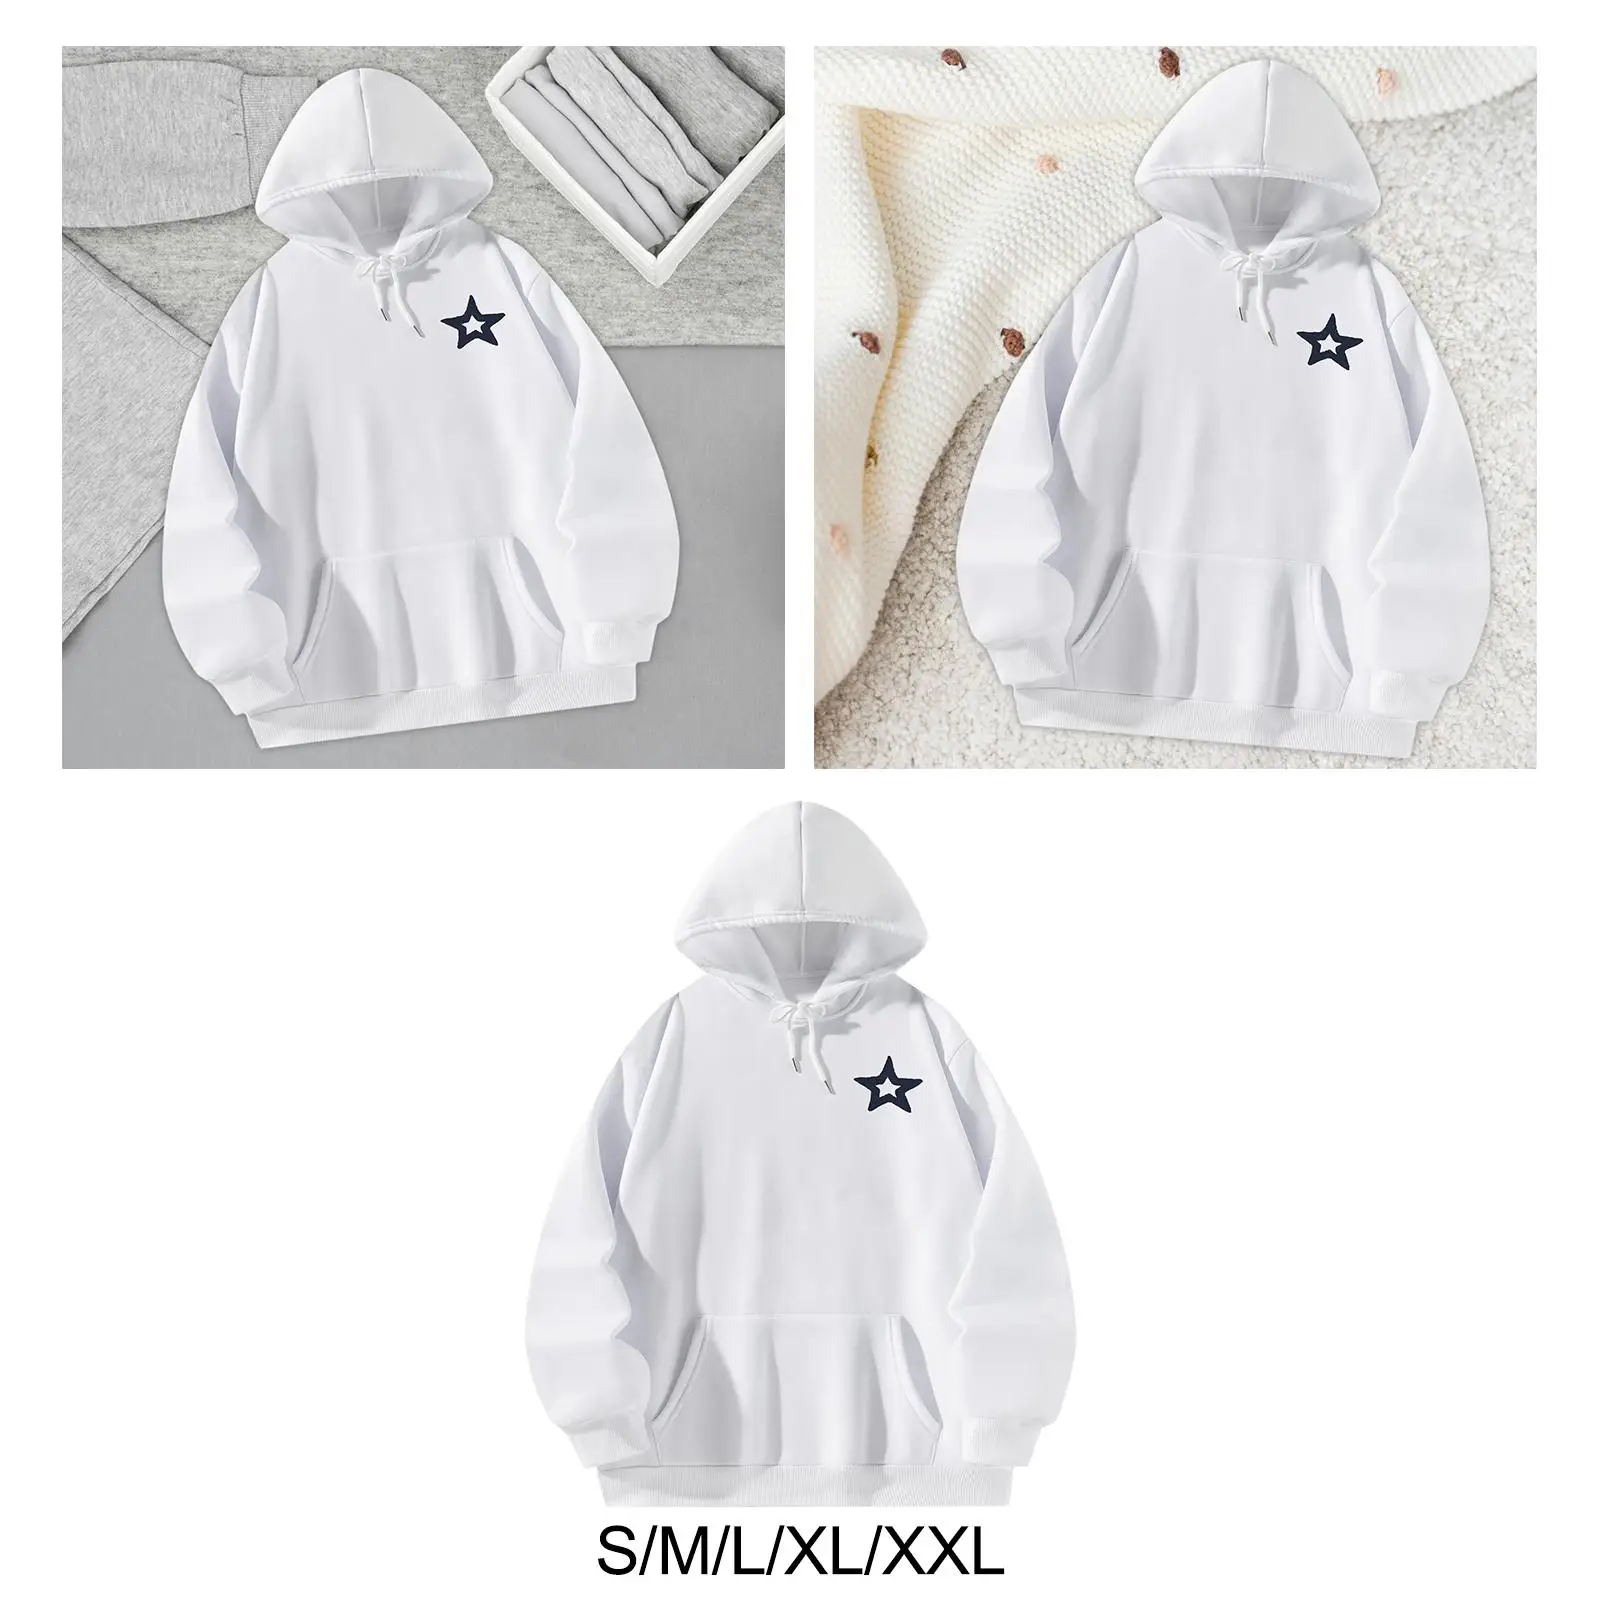 Women Hoodie White Soft Comfortable Casual Trendy Drop Shoulder Sweatshirt for Street Sports Work Going Out Spring Autumn Winter